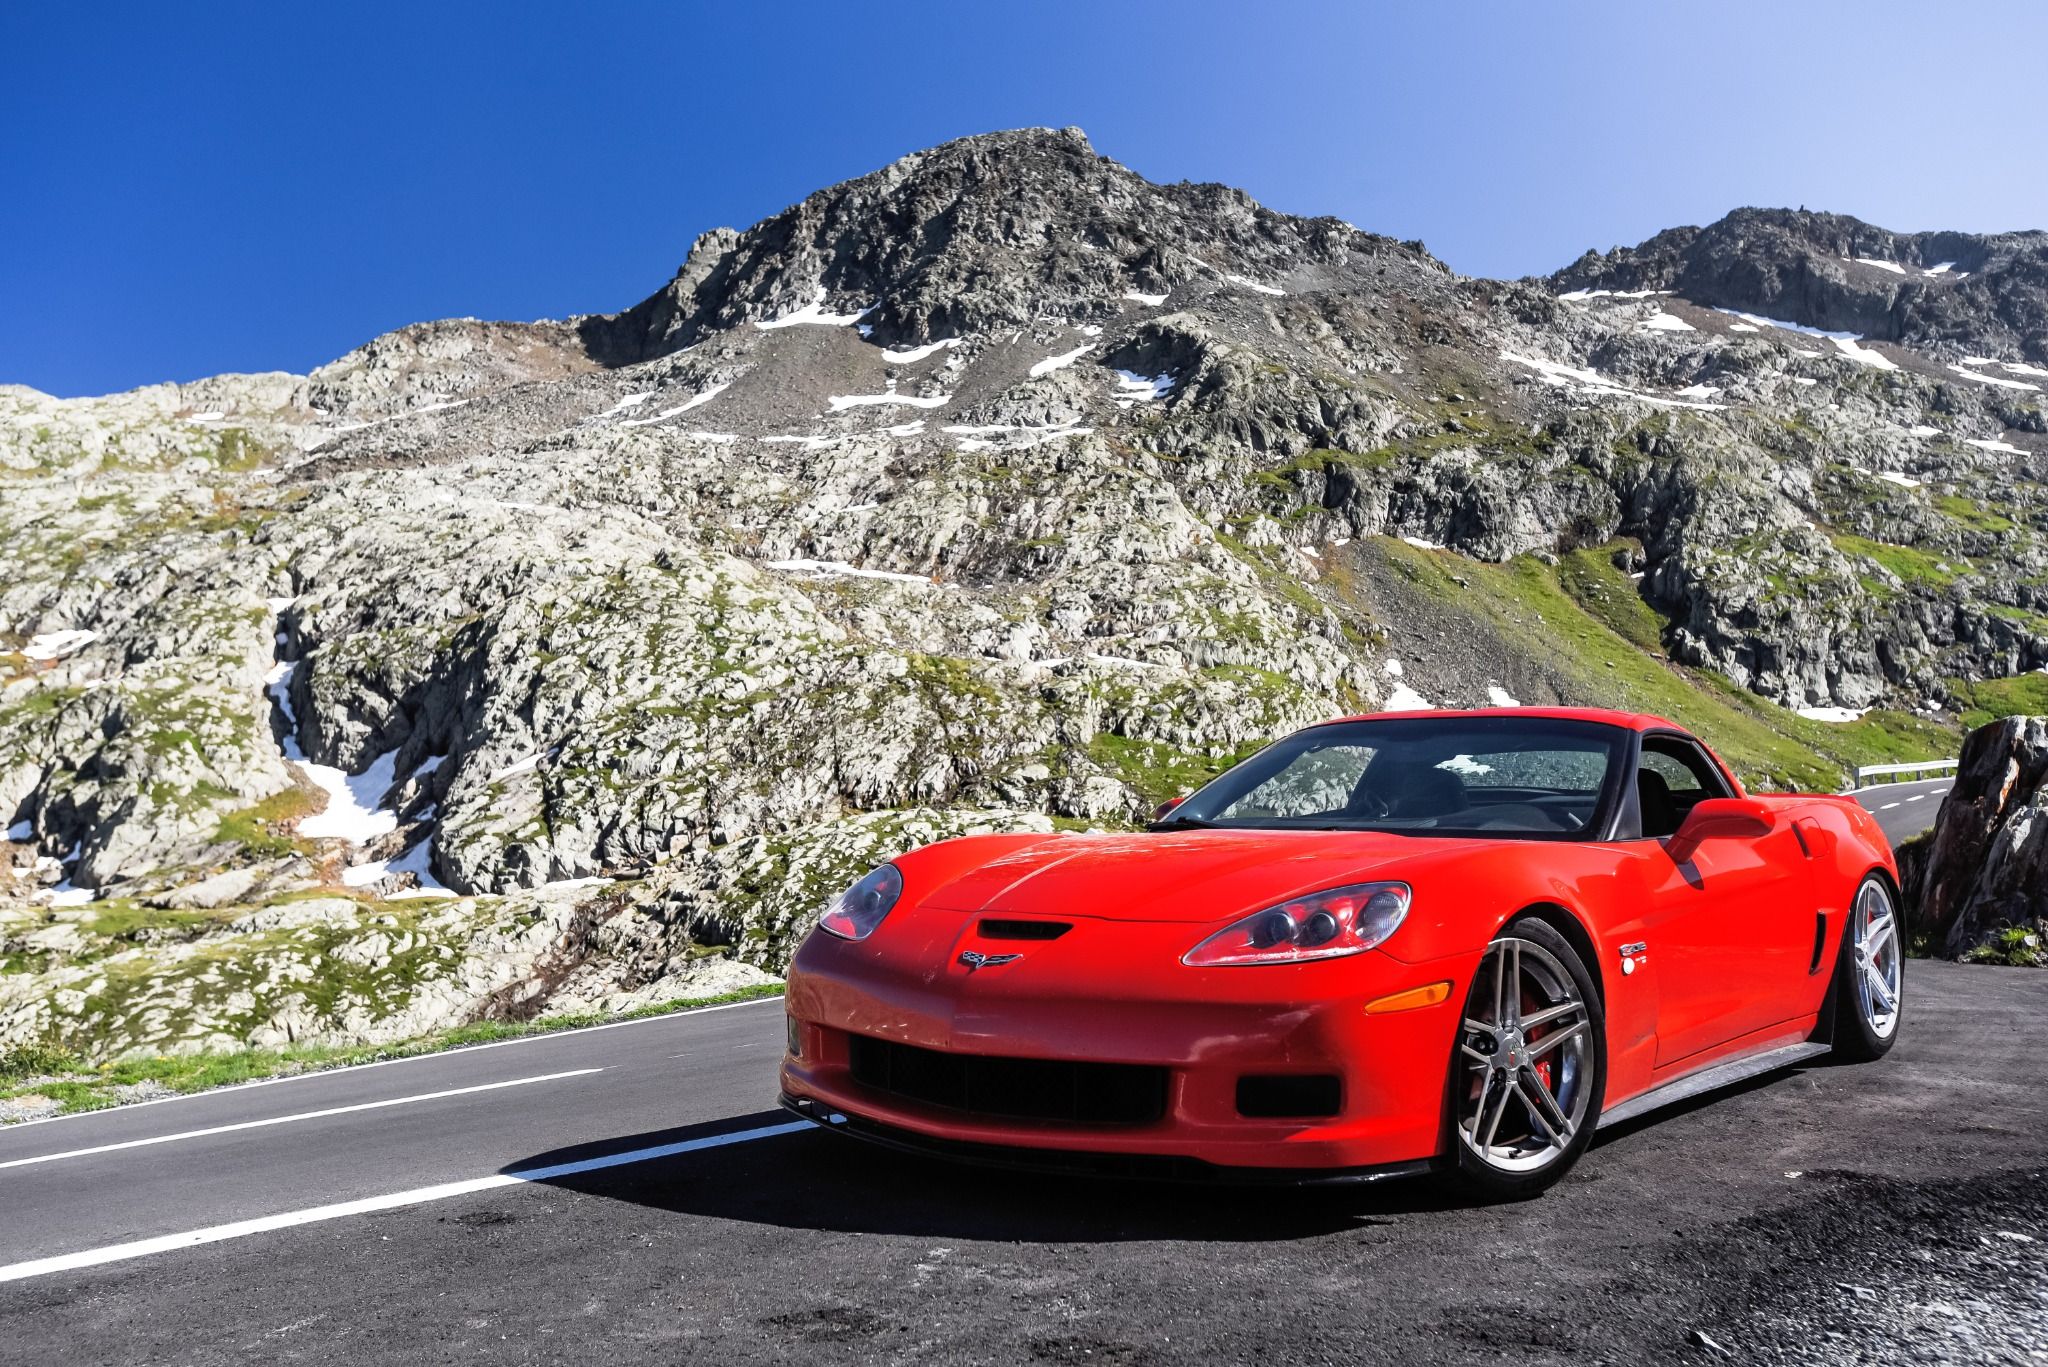 Red sports car in front of mountains